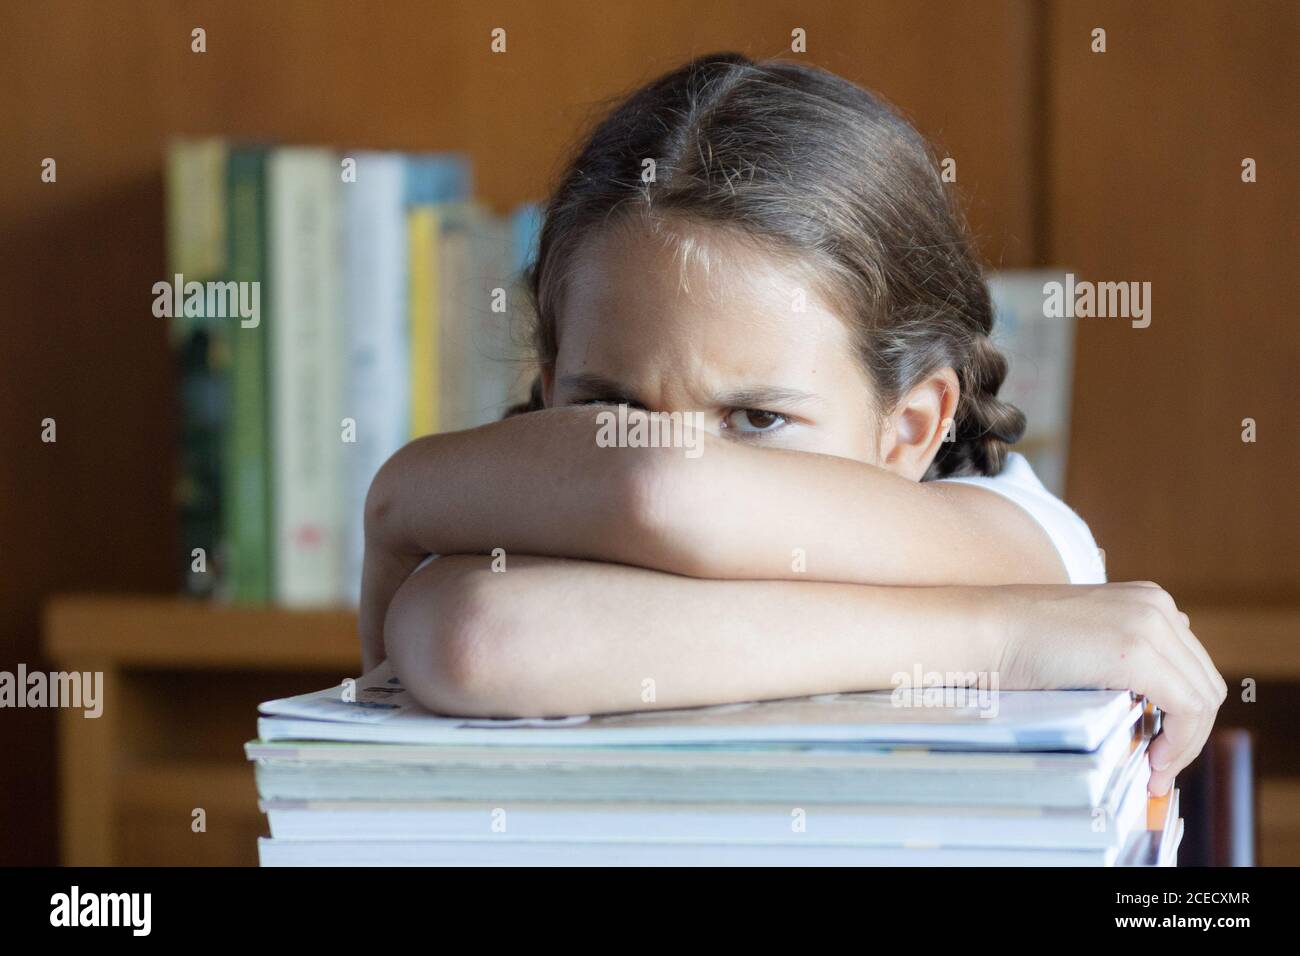 Angry student girl leaning against a pile of textbooks with a frown Stock Photo